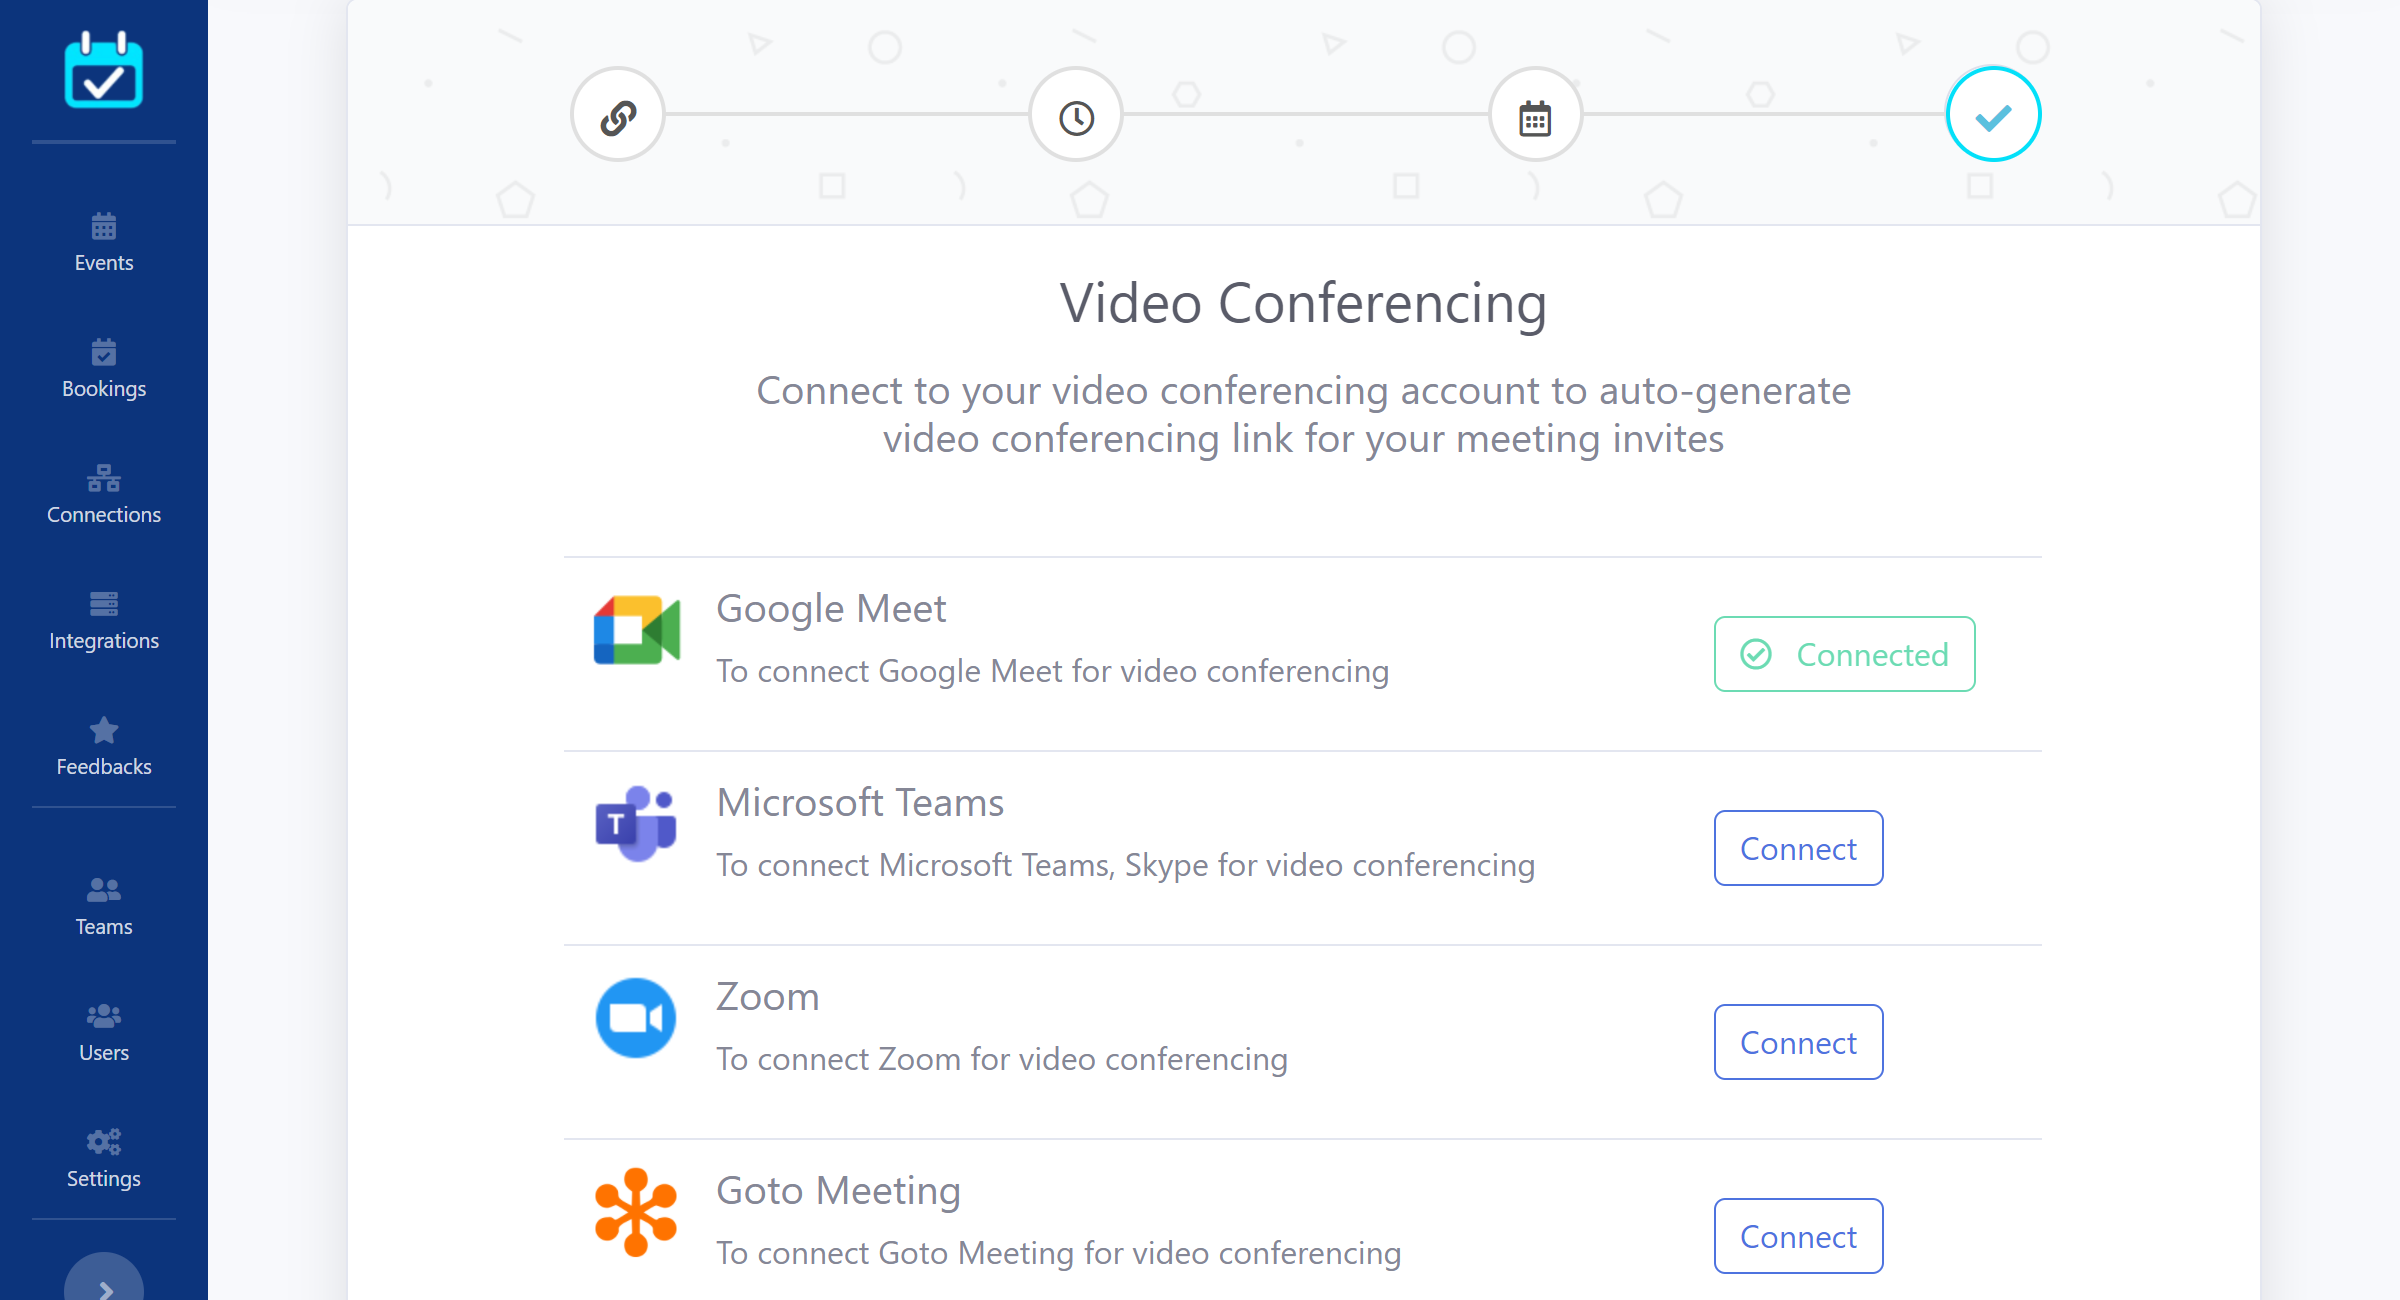 Video conference integration like Zoom, Google meet, Microsoft teams, Webex for webinar or video confrence